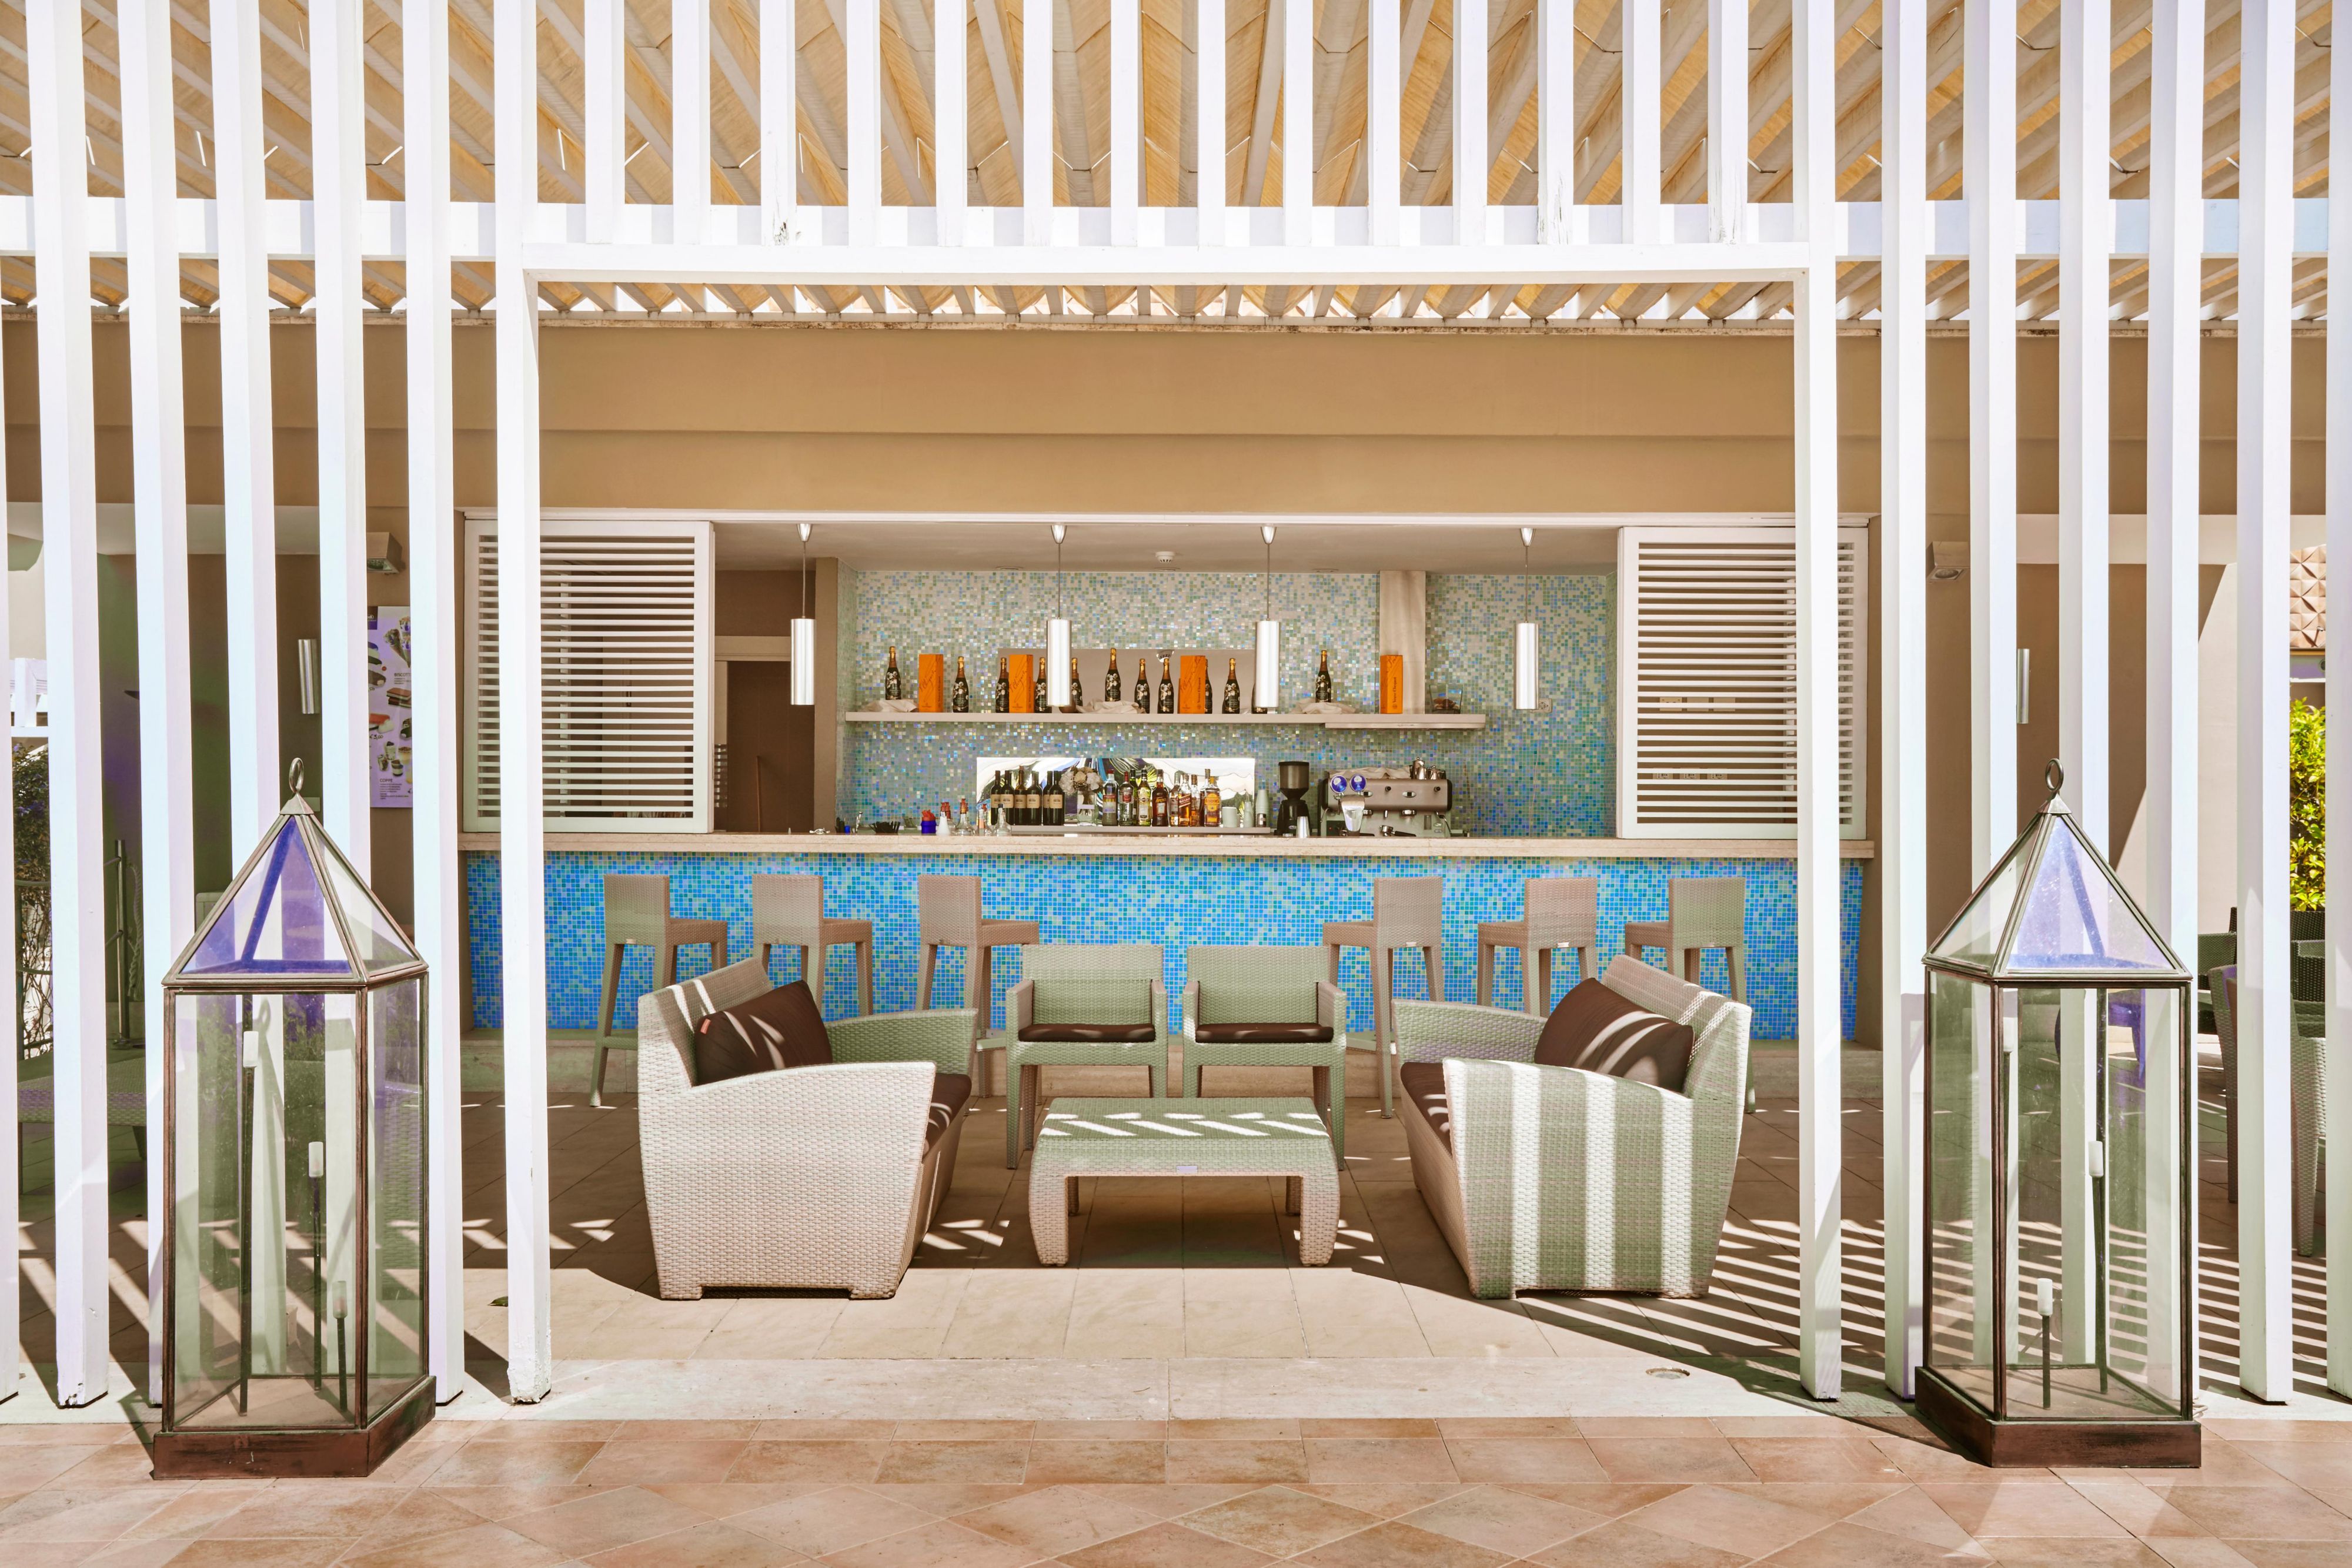 Our Pool Bar offers express dishes and drinks